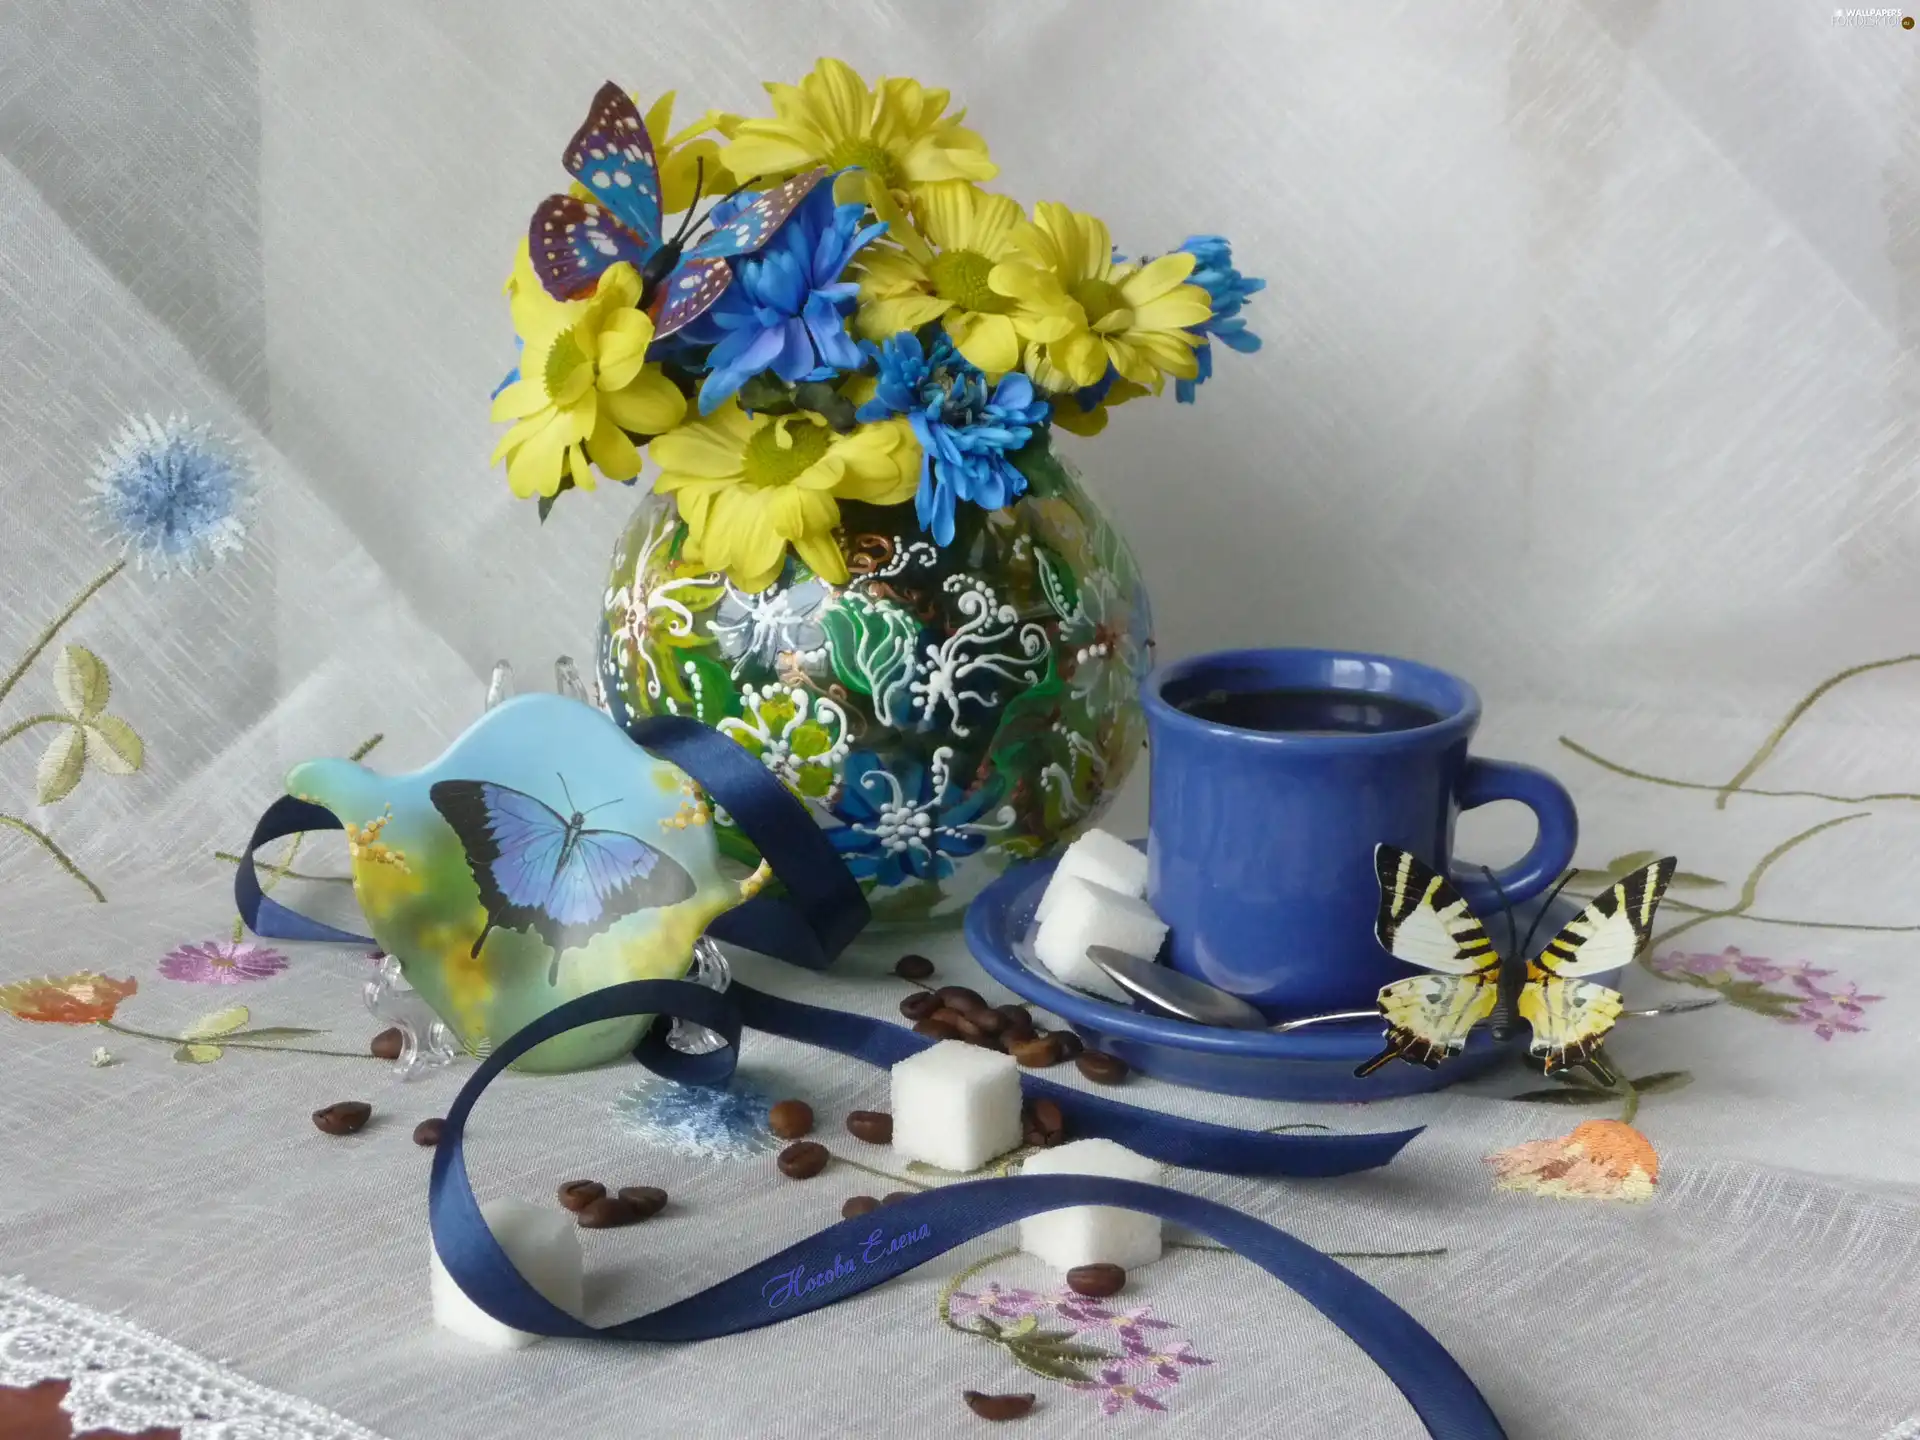 knuckle, vase, small bunch, marguerites, sugar, cup